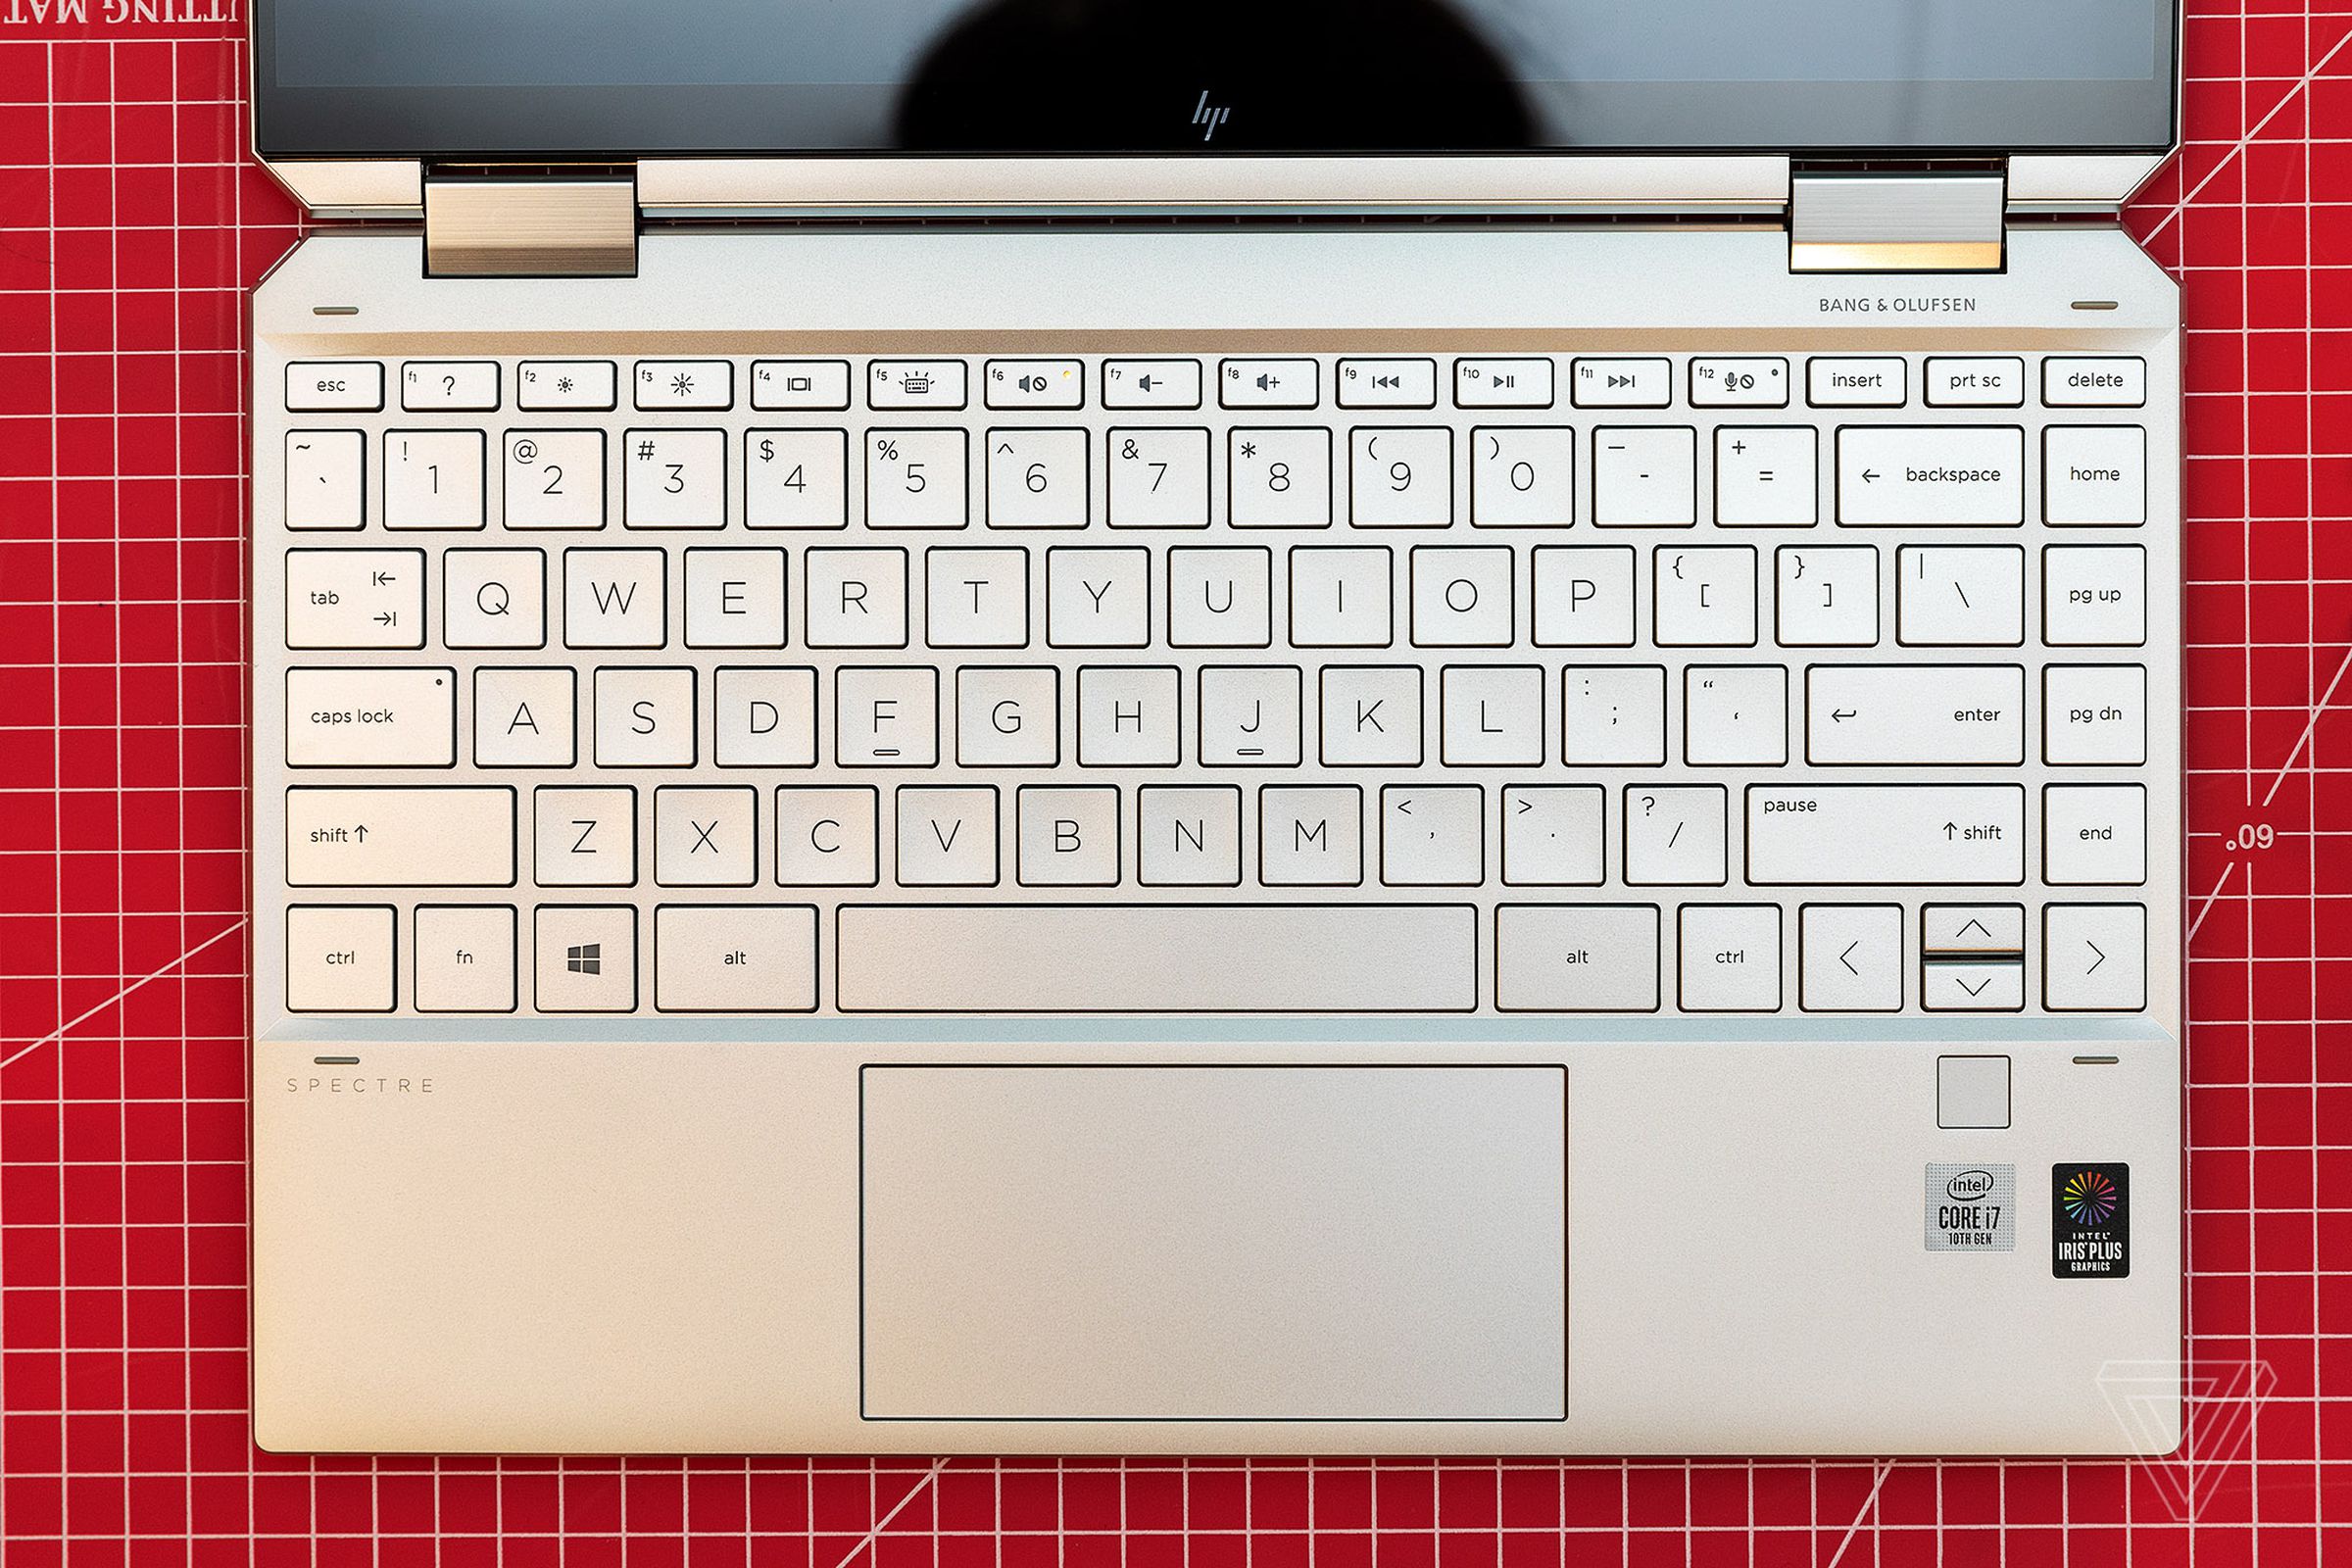 The x360’s keyboard is well-sized and has good travel. And the trackpad finally works as it should.